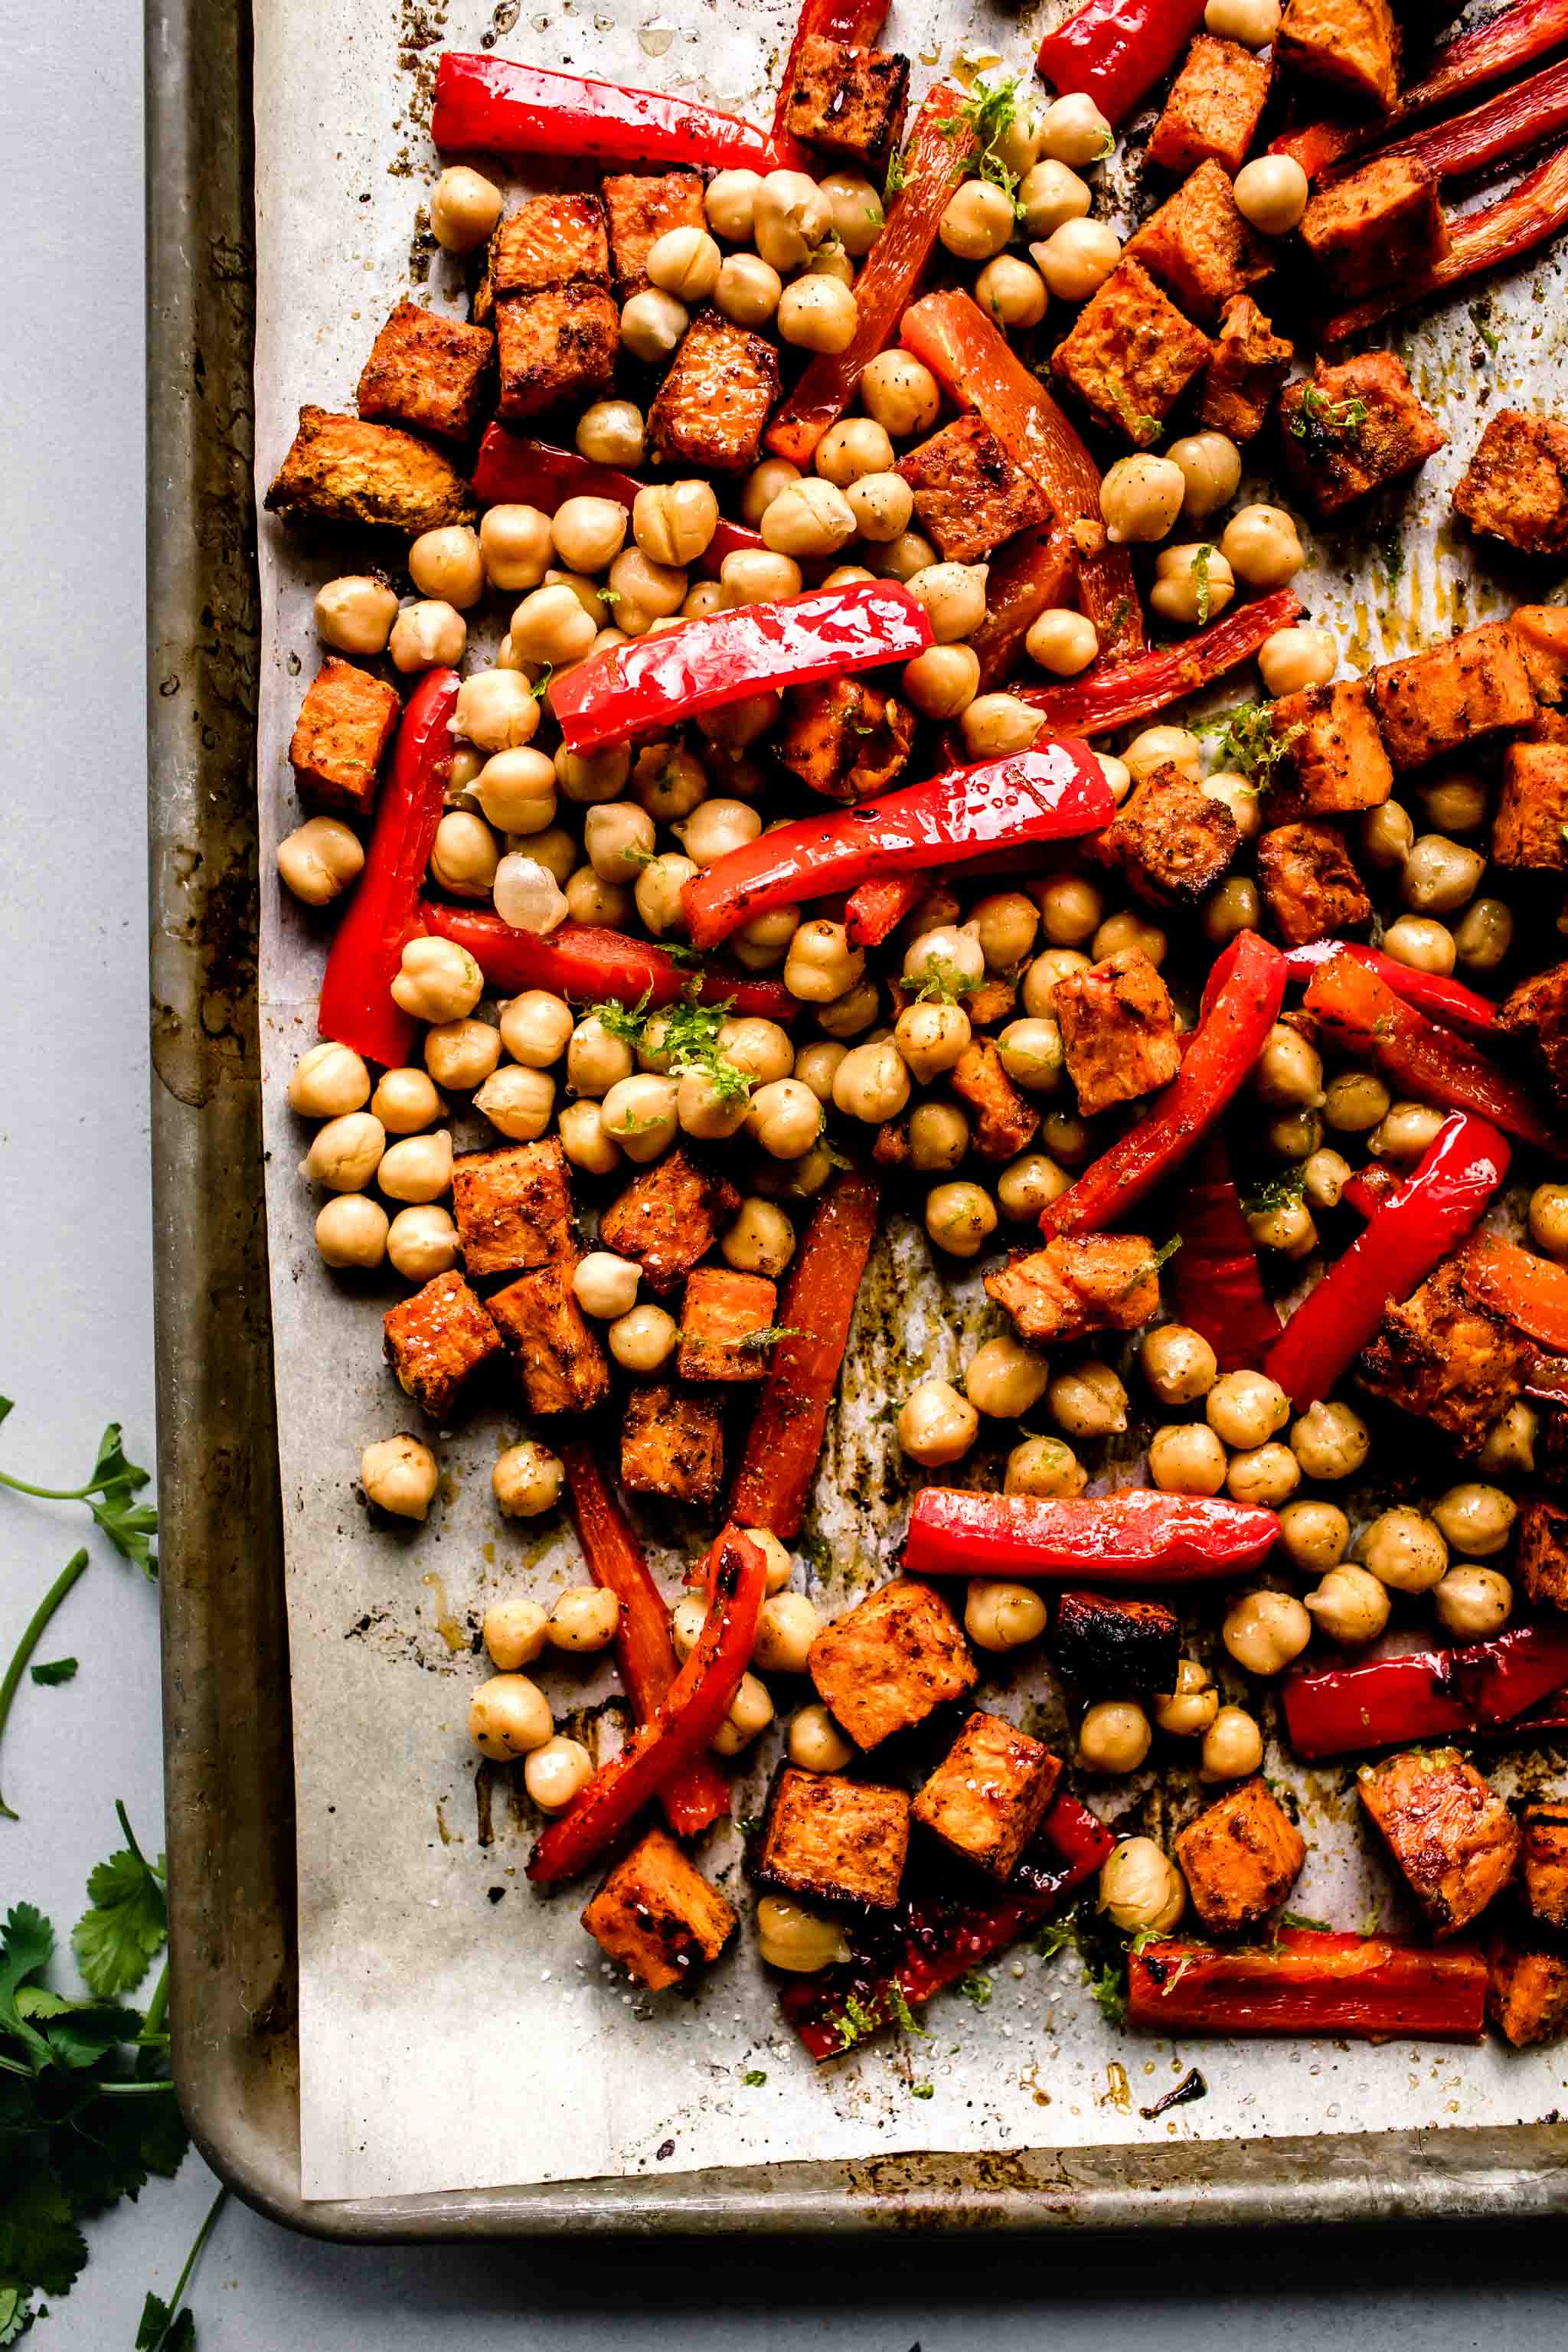 Peppers, sweet potatoes and chickpeas on baking sheet after roasting.